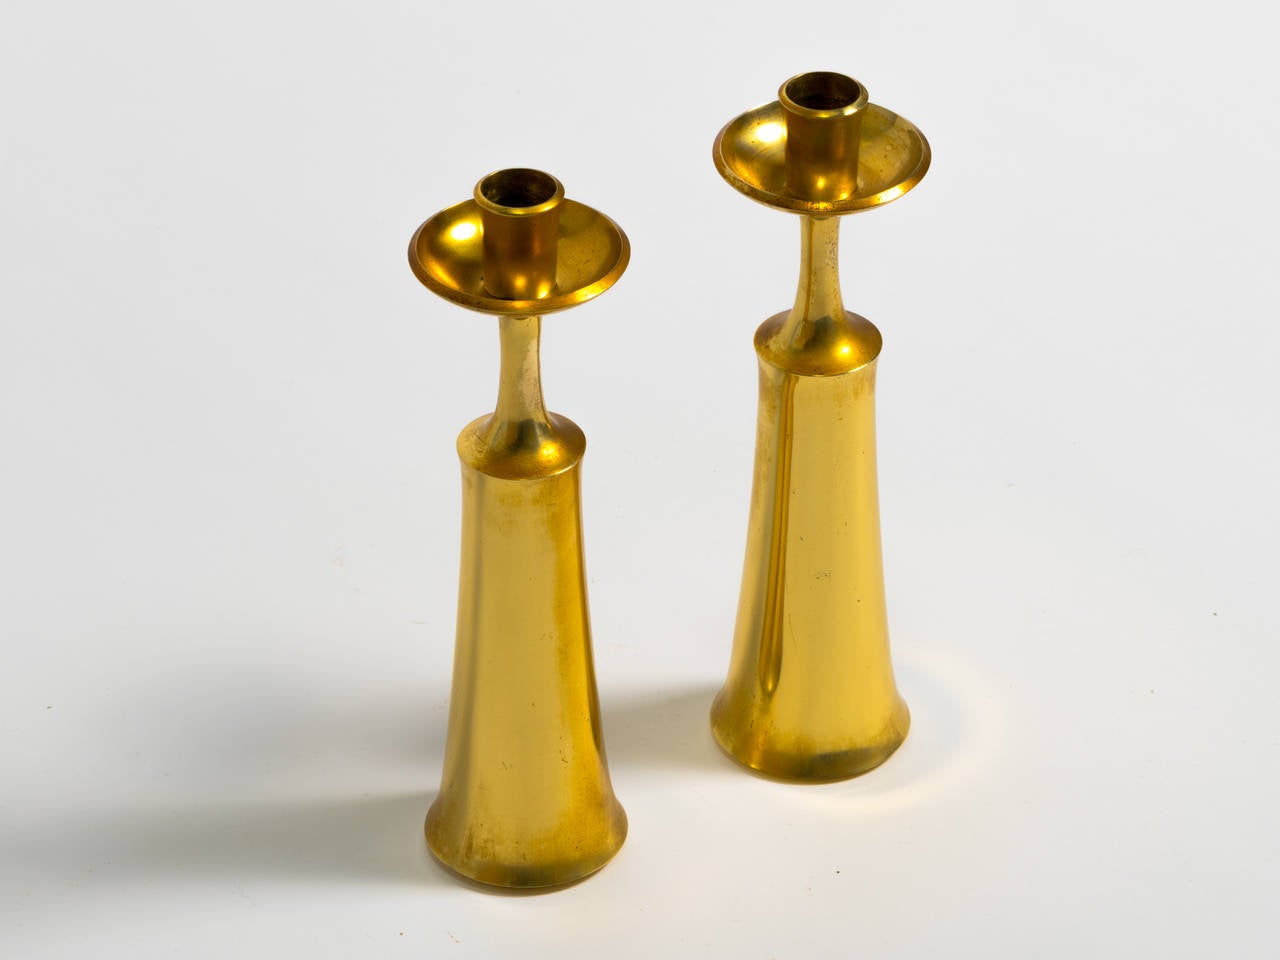 Pair of solid brass candlesticks, circa 1950. Measures: 9.25 inches high.